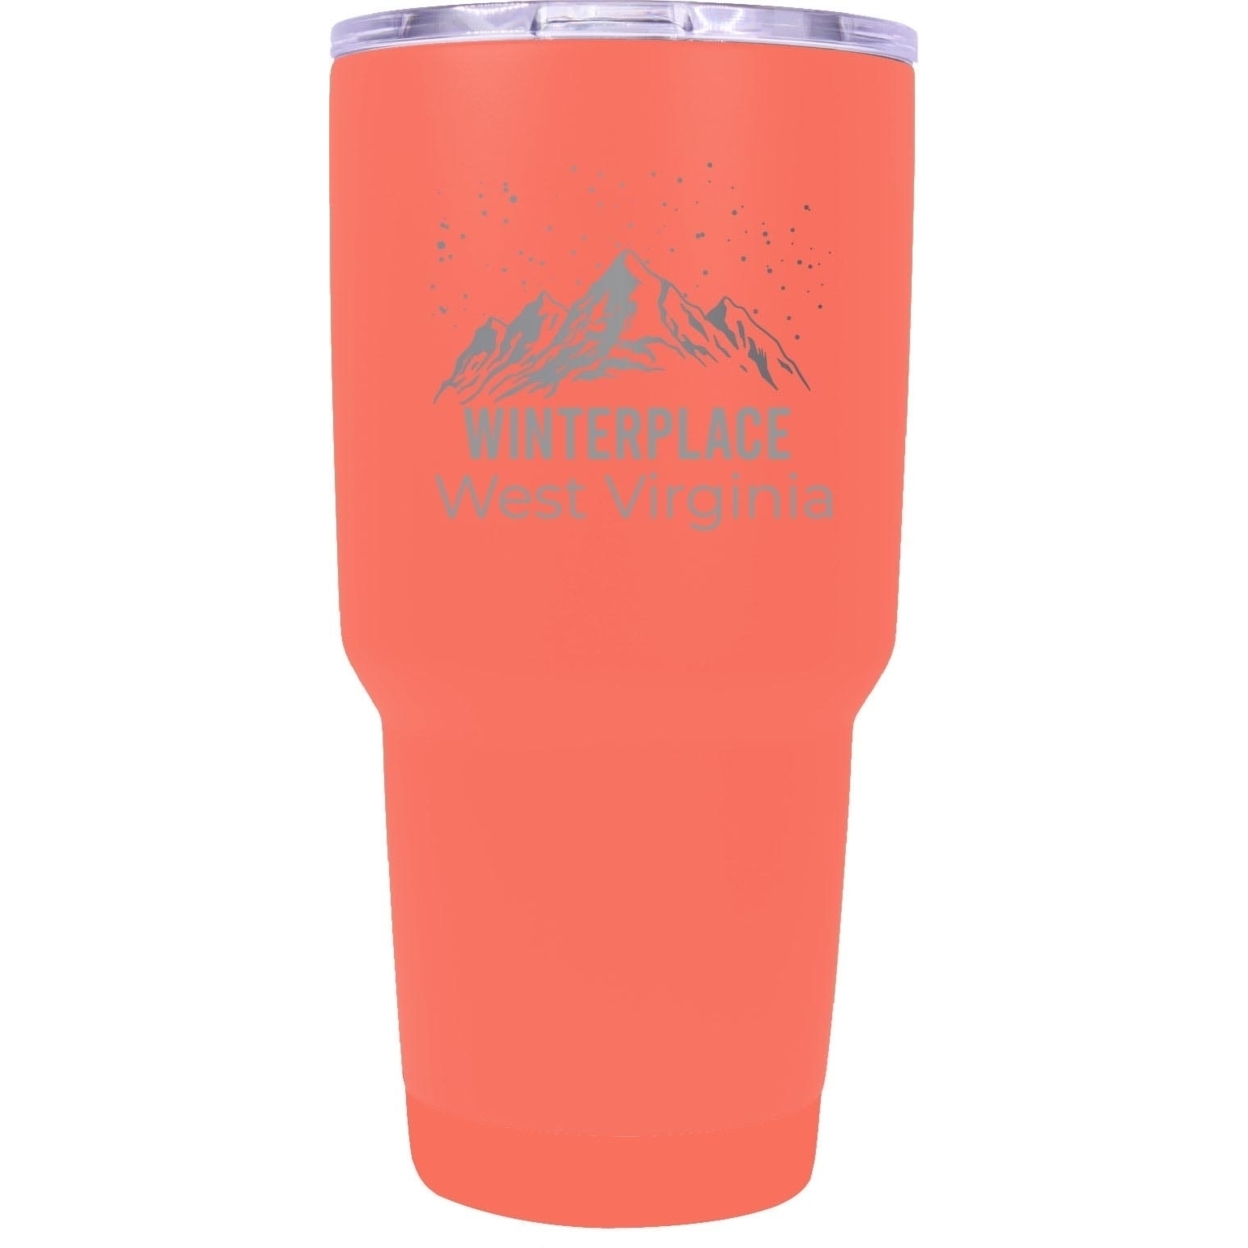 Winterplace West Virginia Ski Snowboard Winter Souvenir Laser Engraved 24 Oz Insulated Stainless Steel Tumbler - Coral